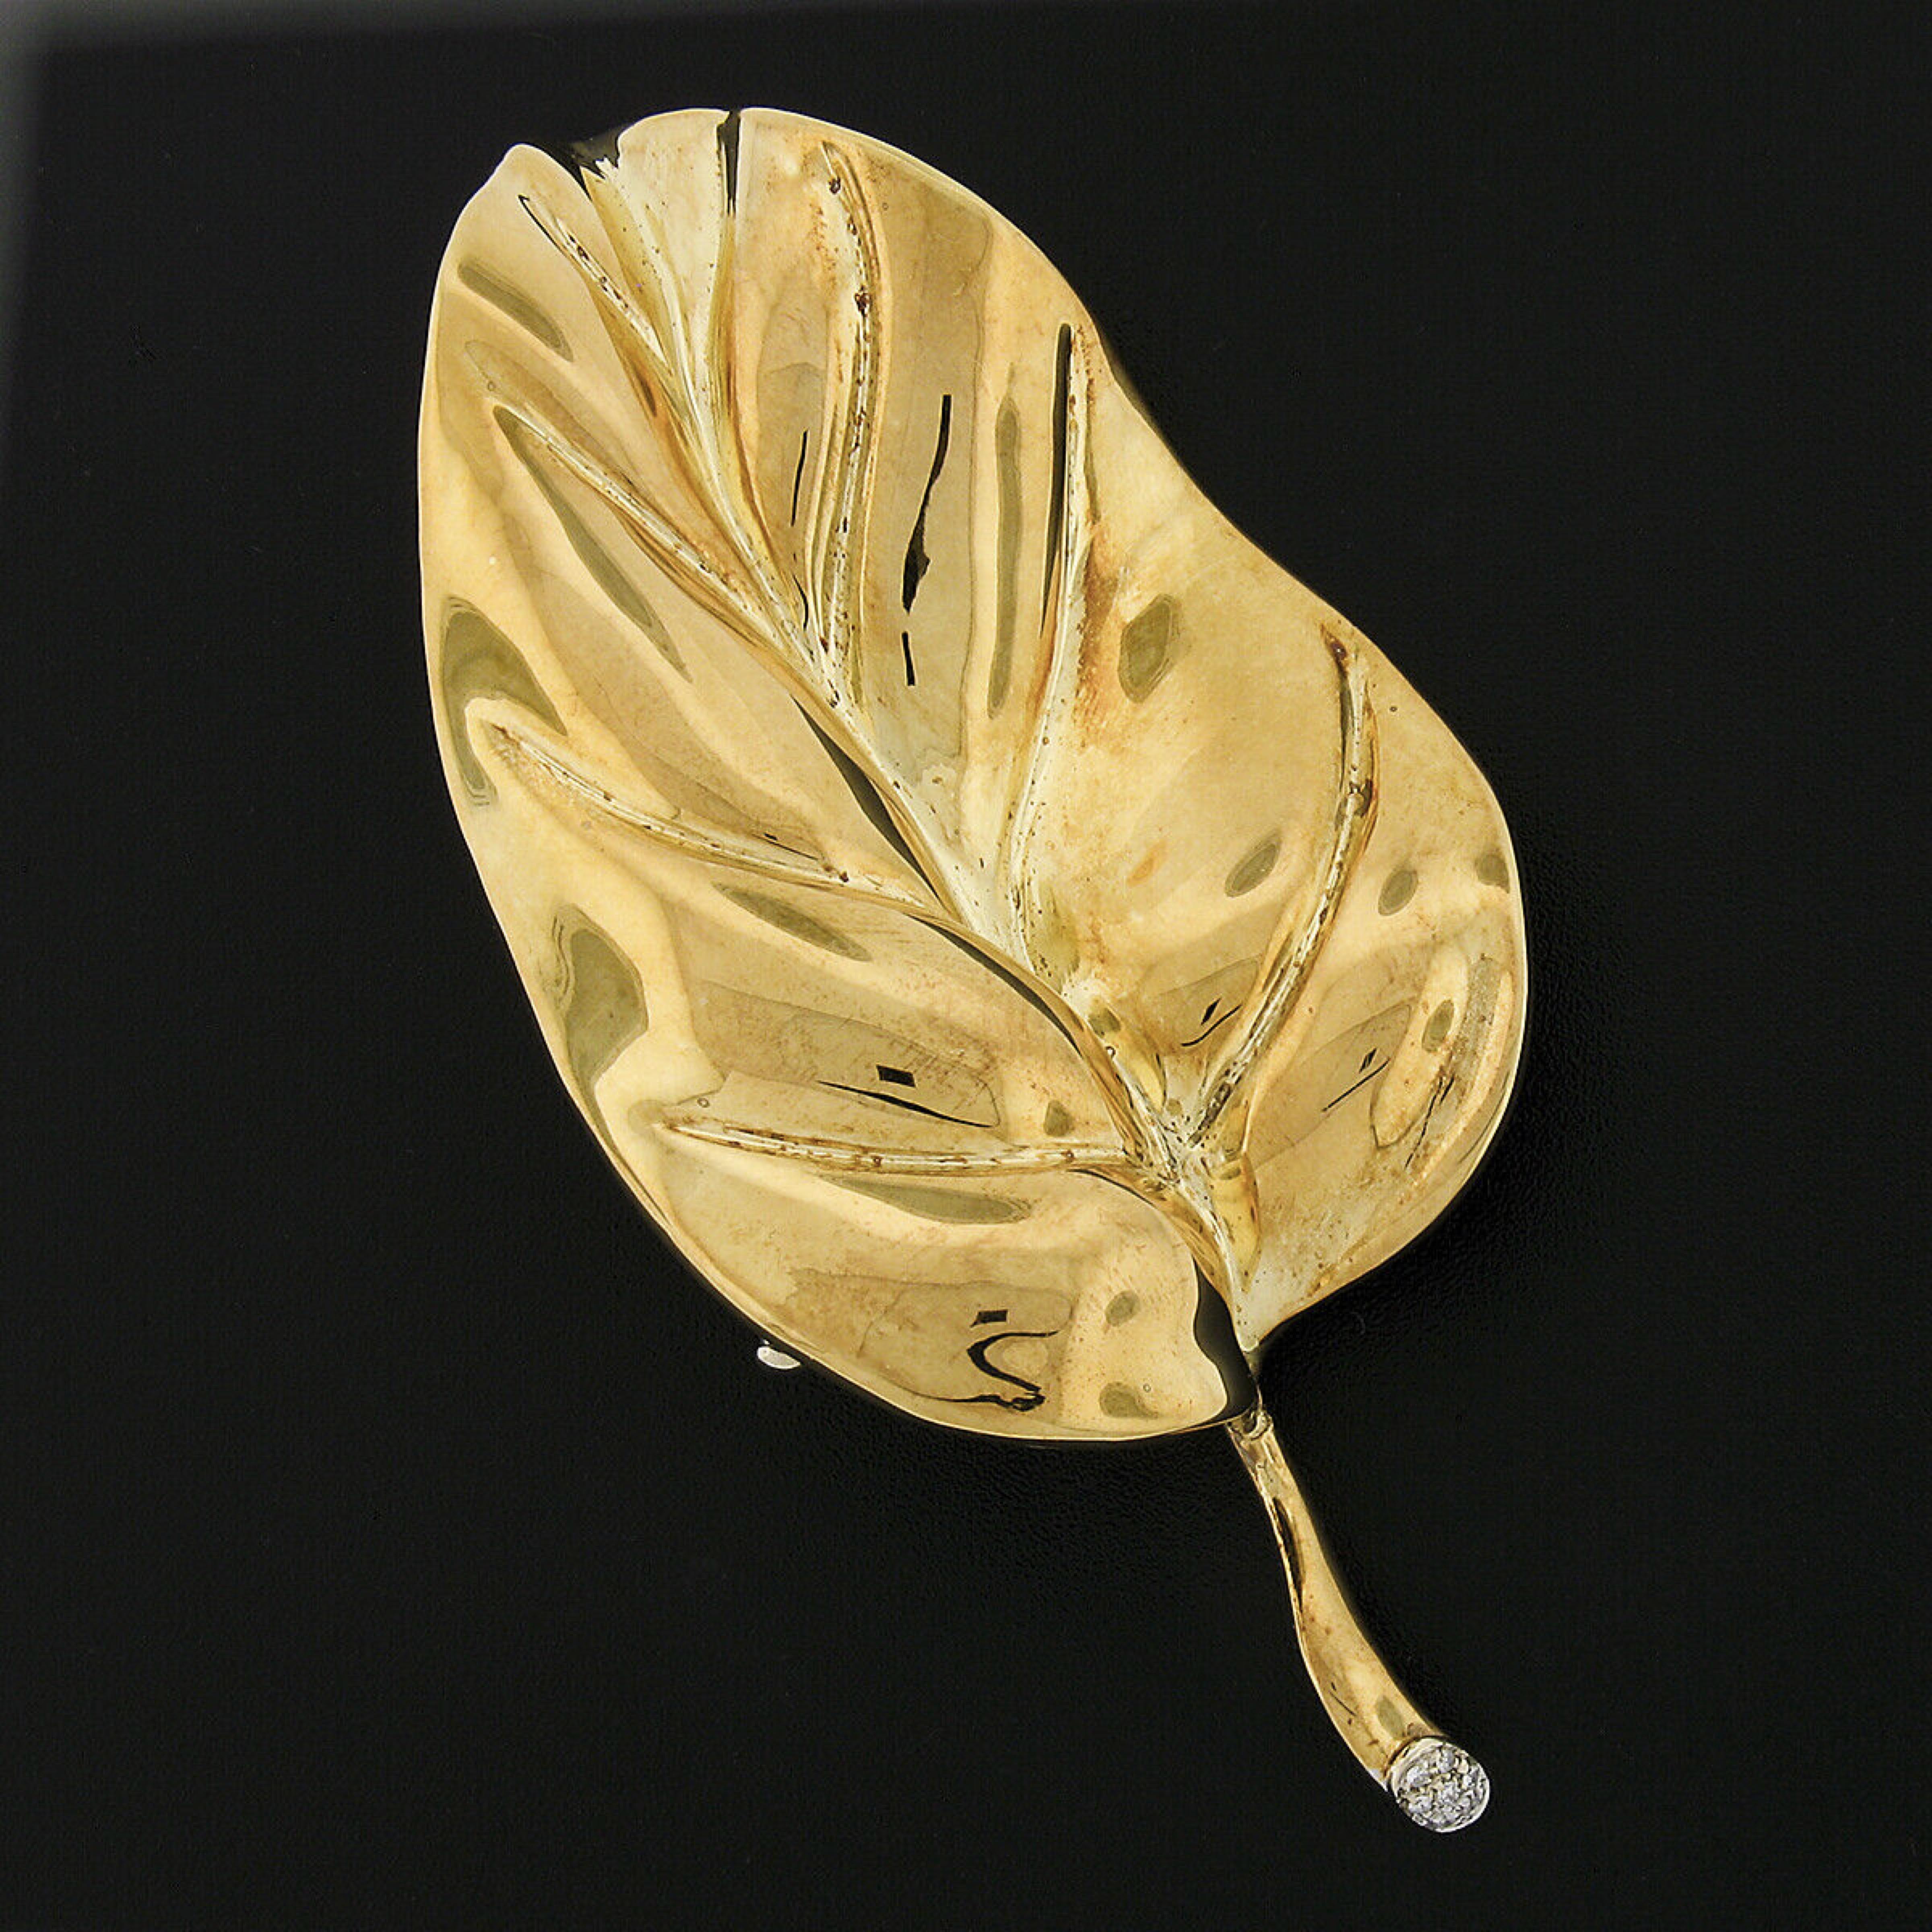 Here we have a very unique and well made large leaf pin/brooch crafted in solid 18k yellow gold and features an incredibly realistic, three-dimensional leaf design with amazing detail and high-polished finishing throughout. Its stem is adorned with